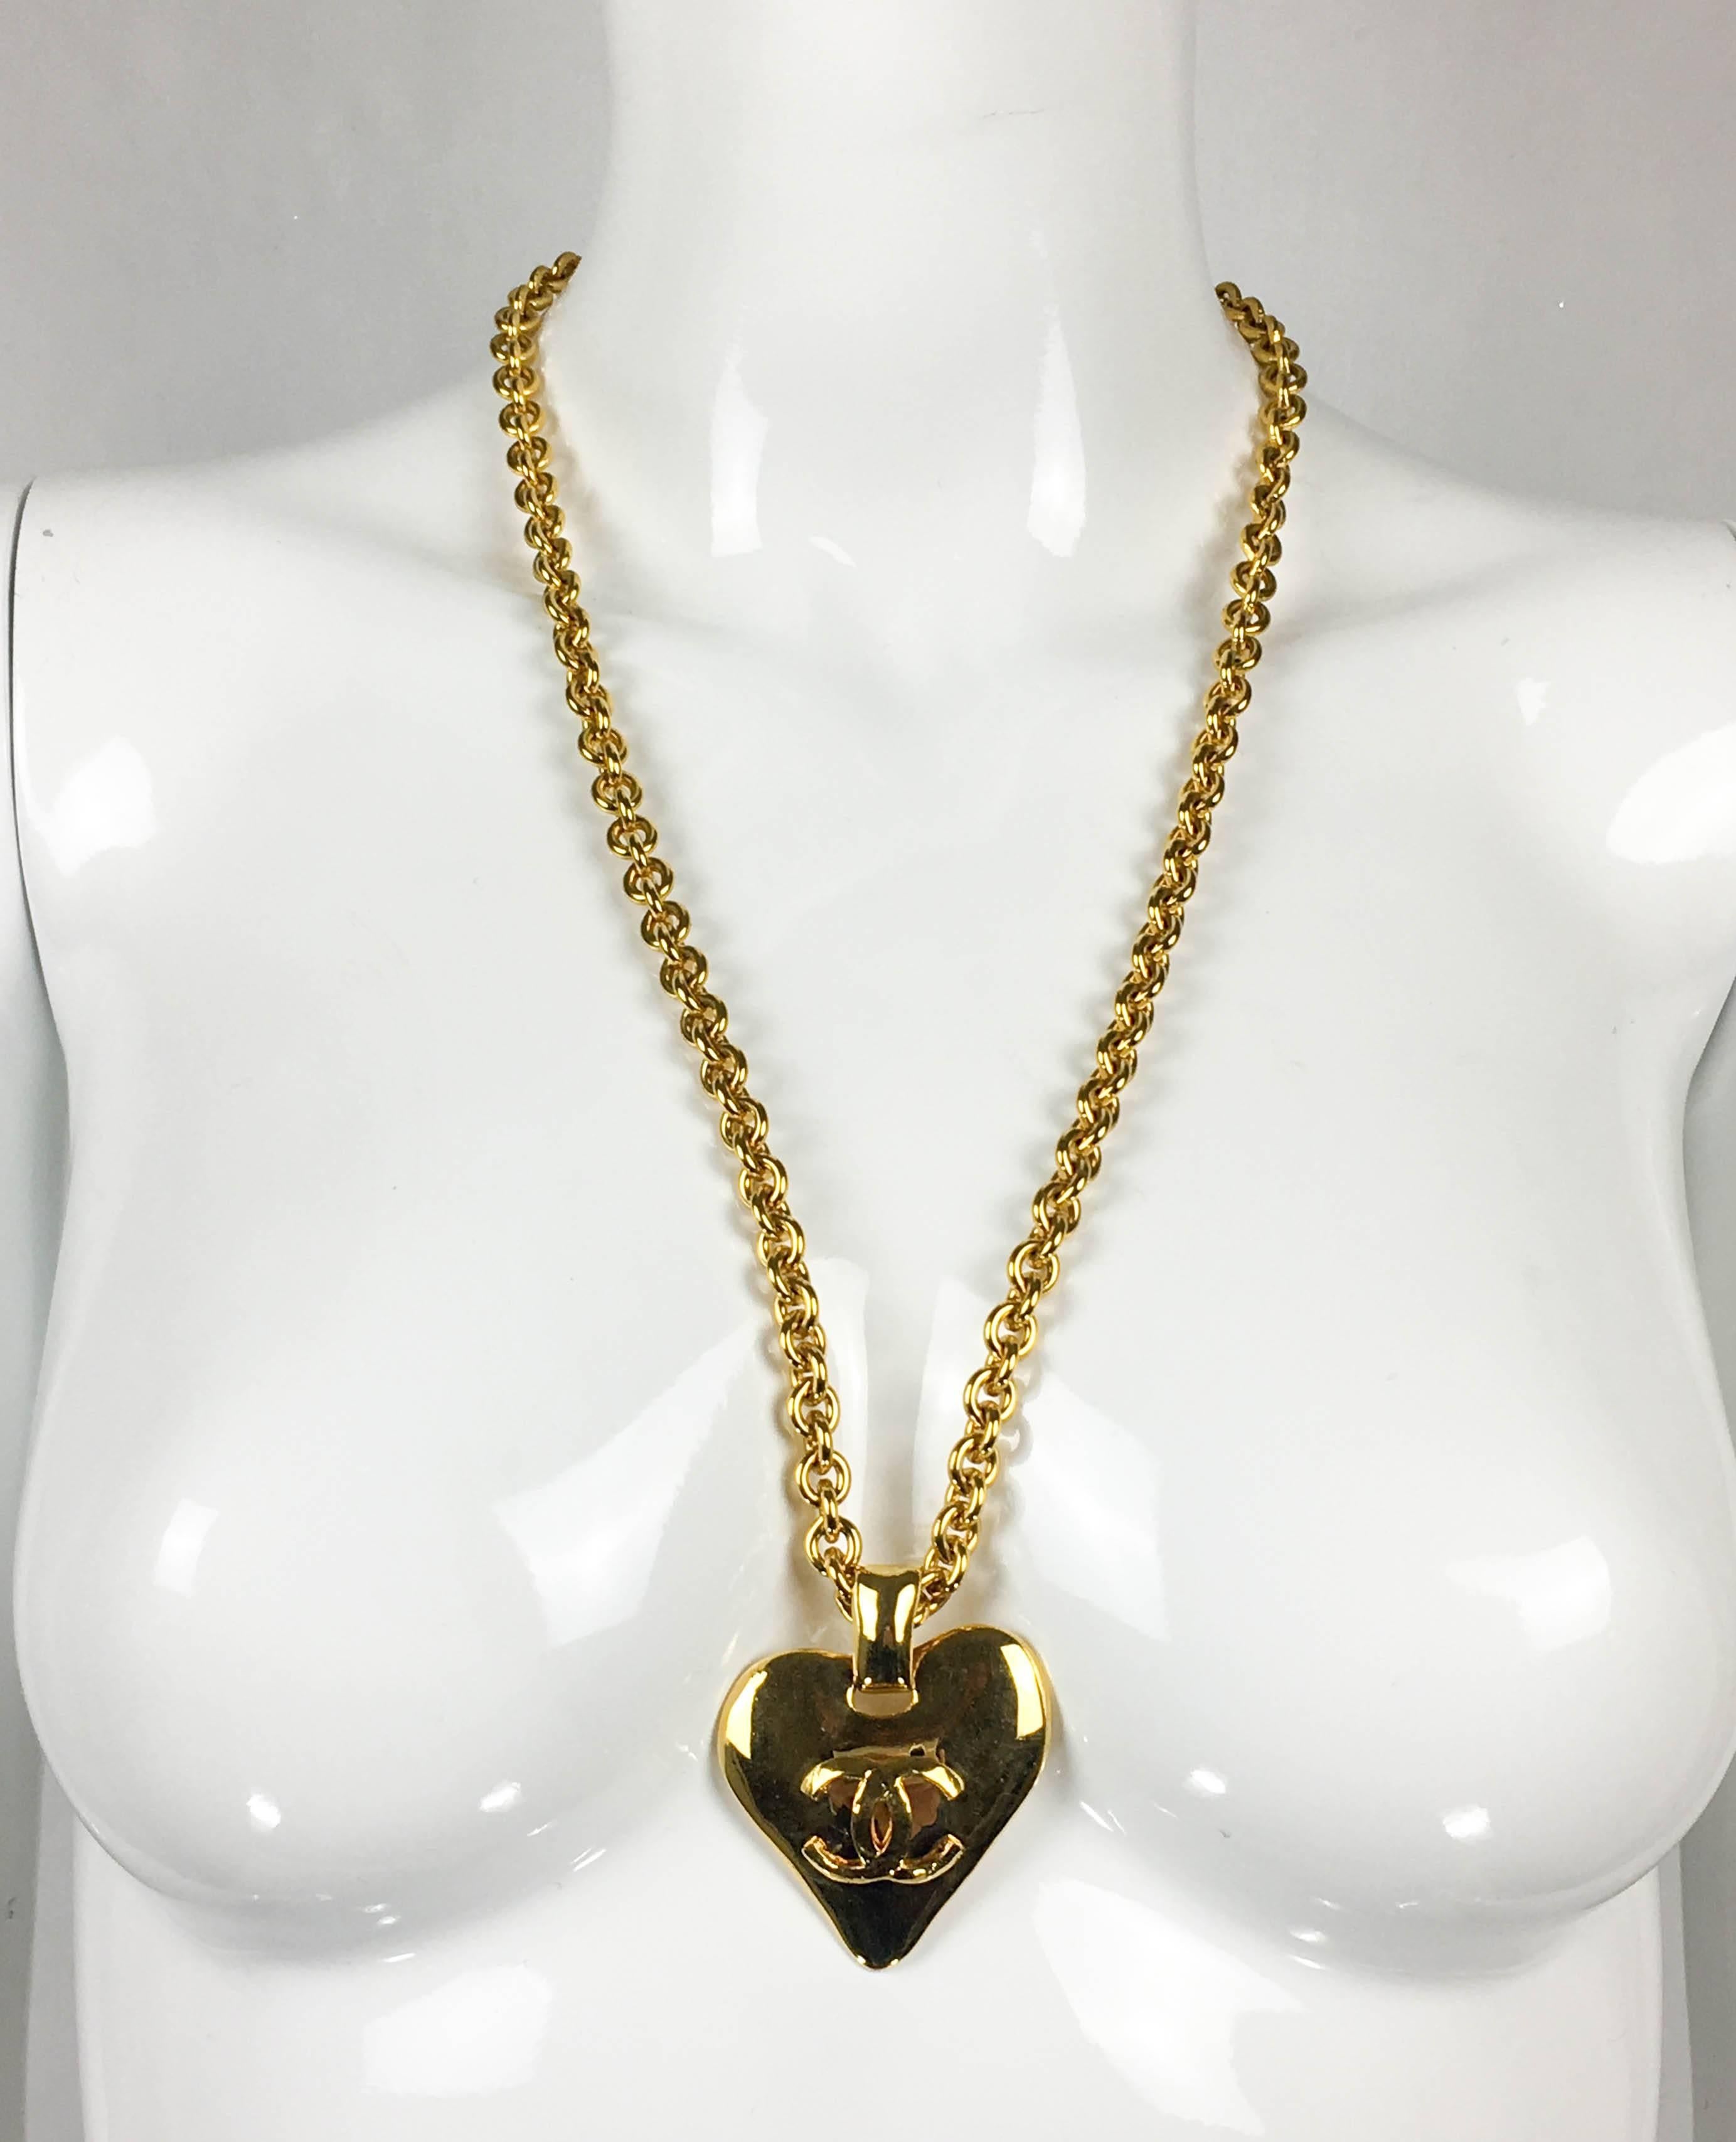 Vintage Chanel Heart-Shaped Pendant Necklace. This striking pendant necklace by Chanel was designed for the 1993 Spring / Summer Collection. Gold-Plated, it comprises of a chain and a heart-shaped pendant with the iconic ‘CC’ logo in the middle.